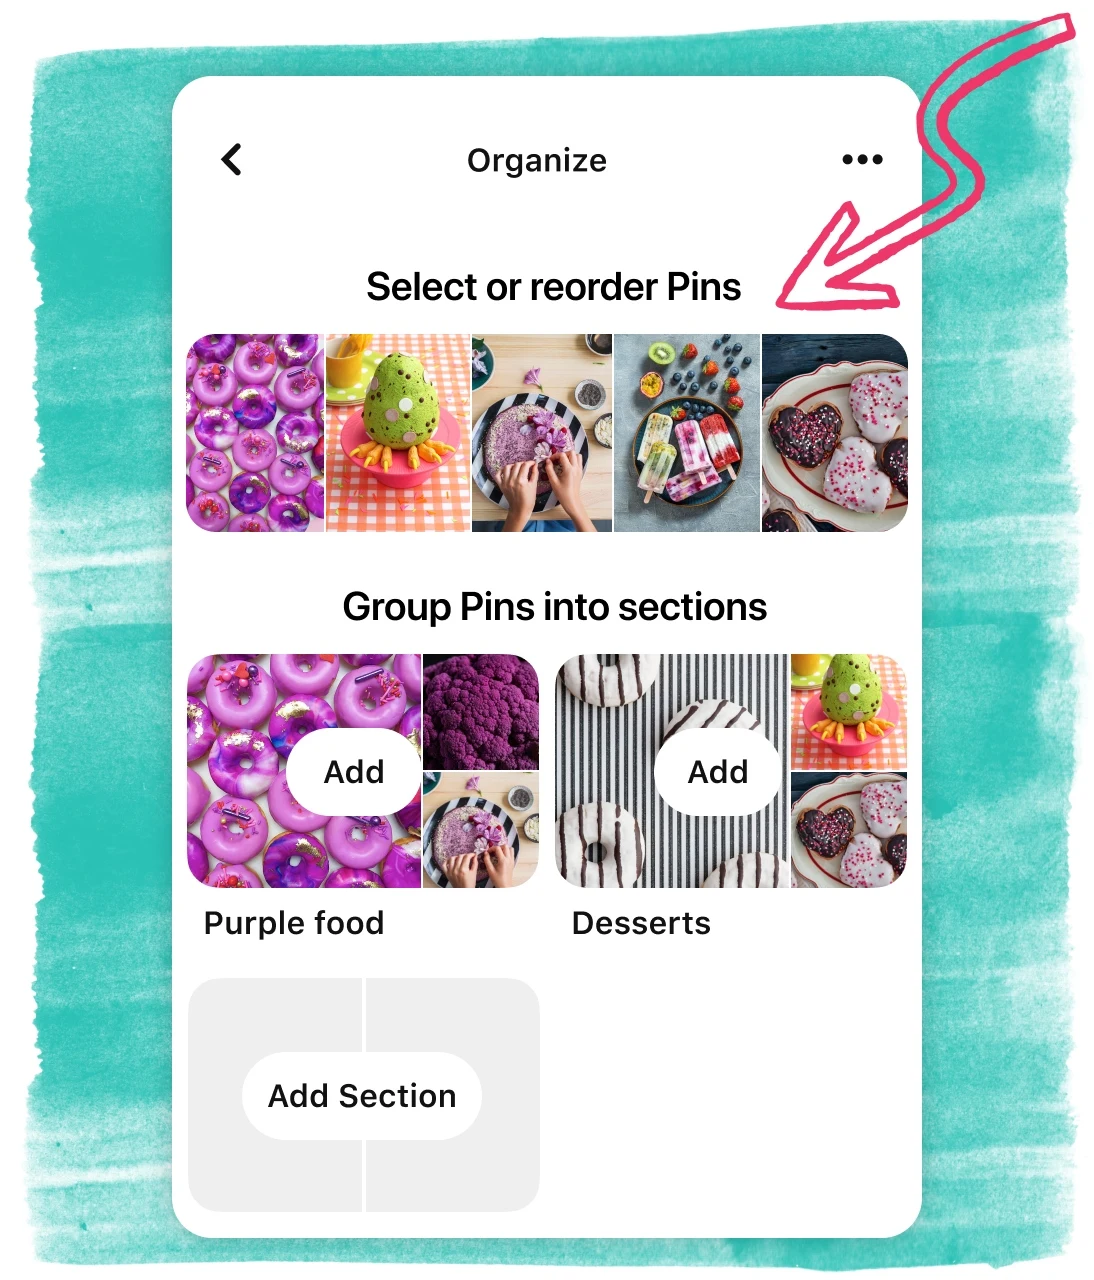 Organize boards page with pink arrow pointing at reorder/select pins row